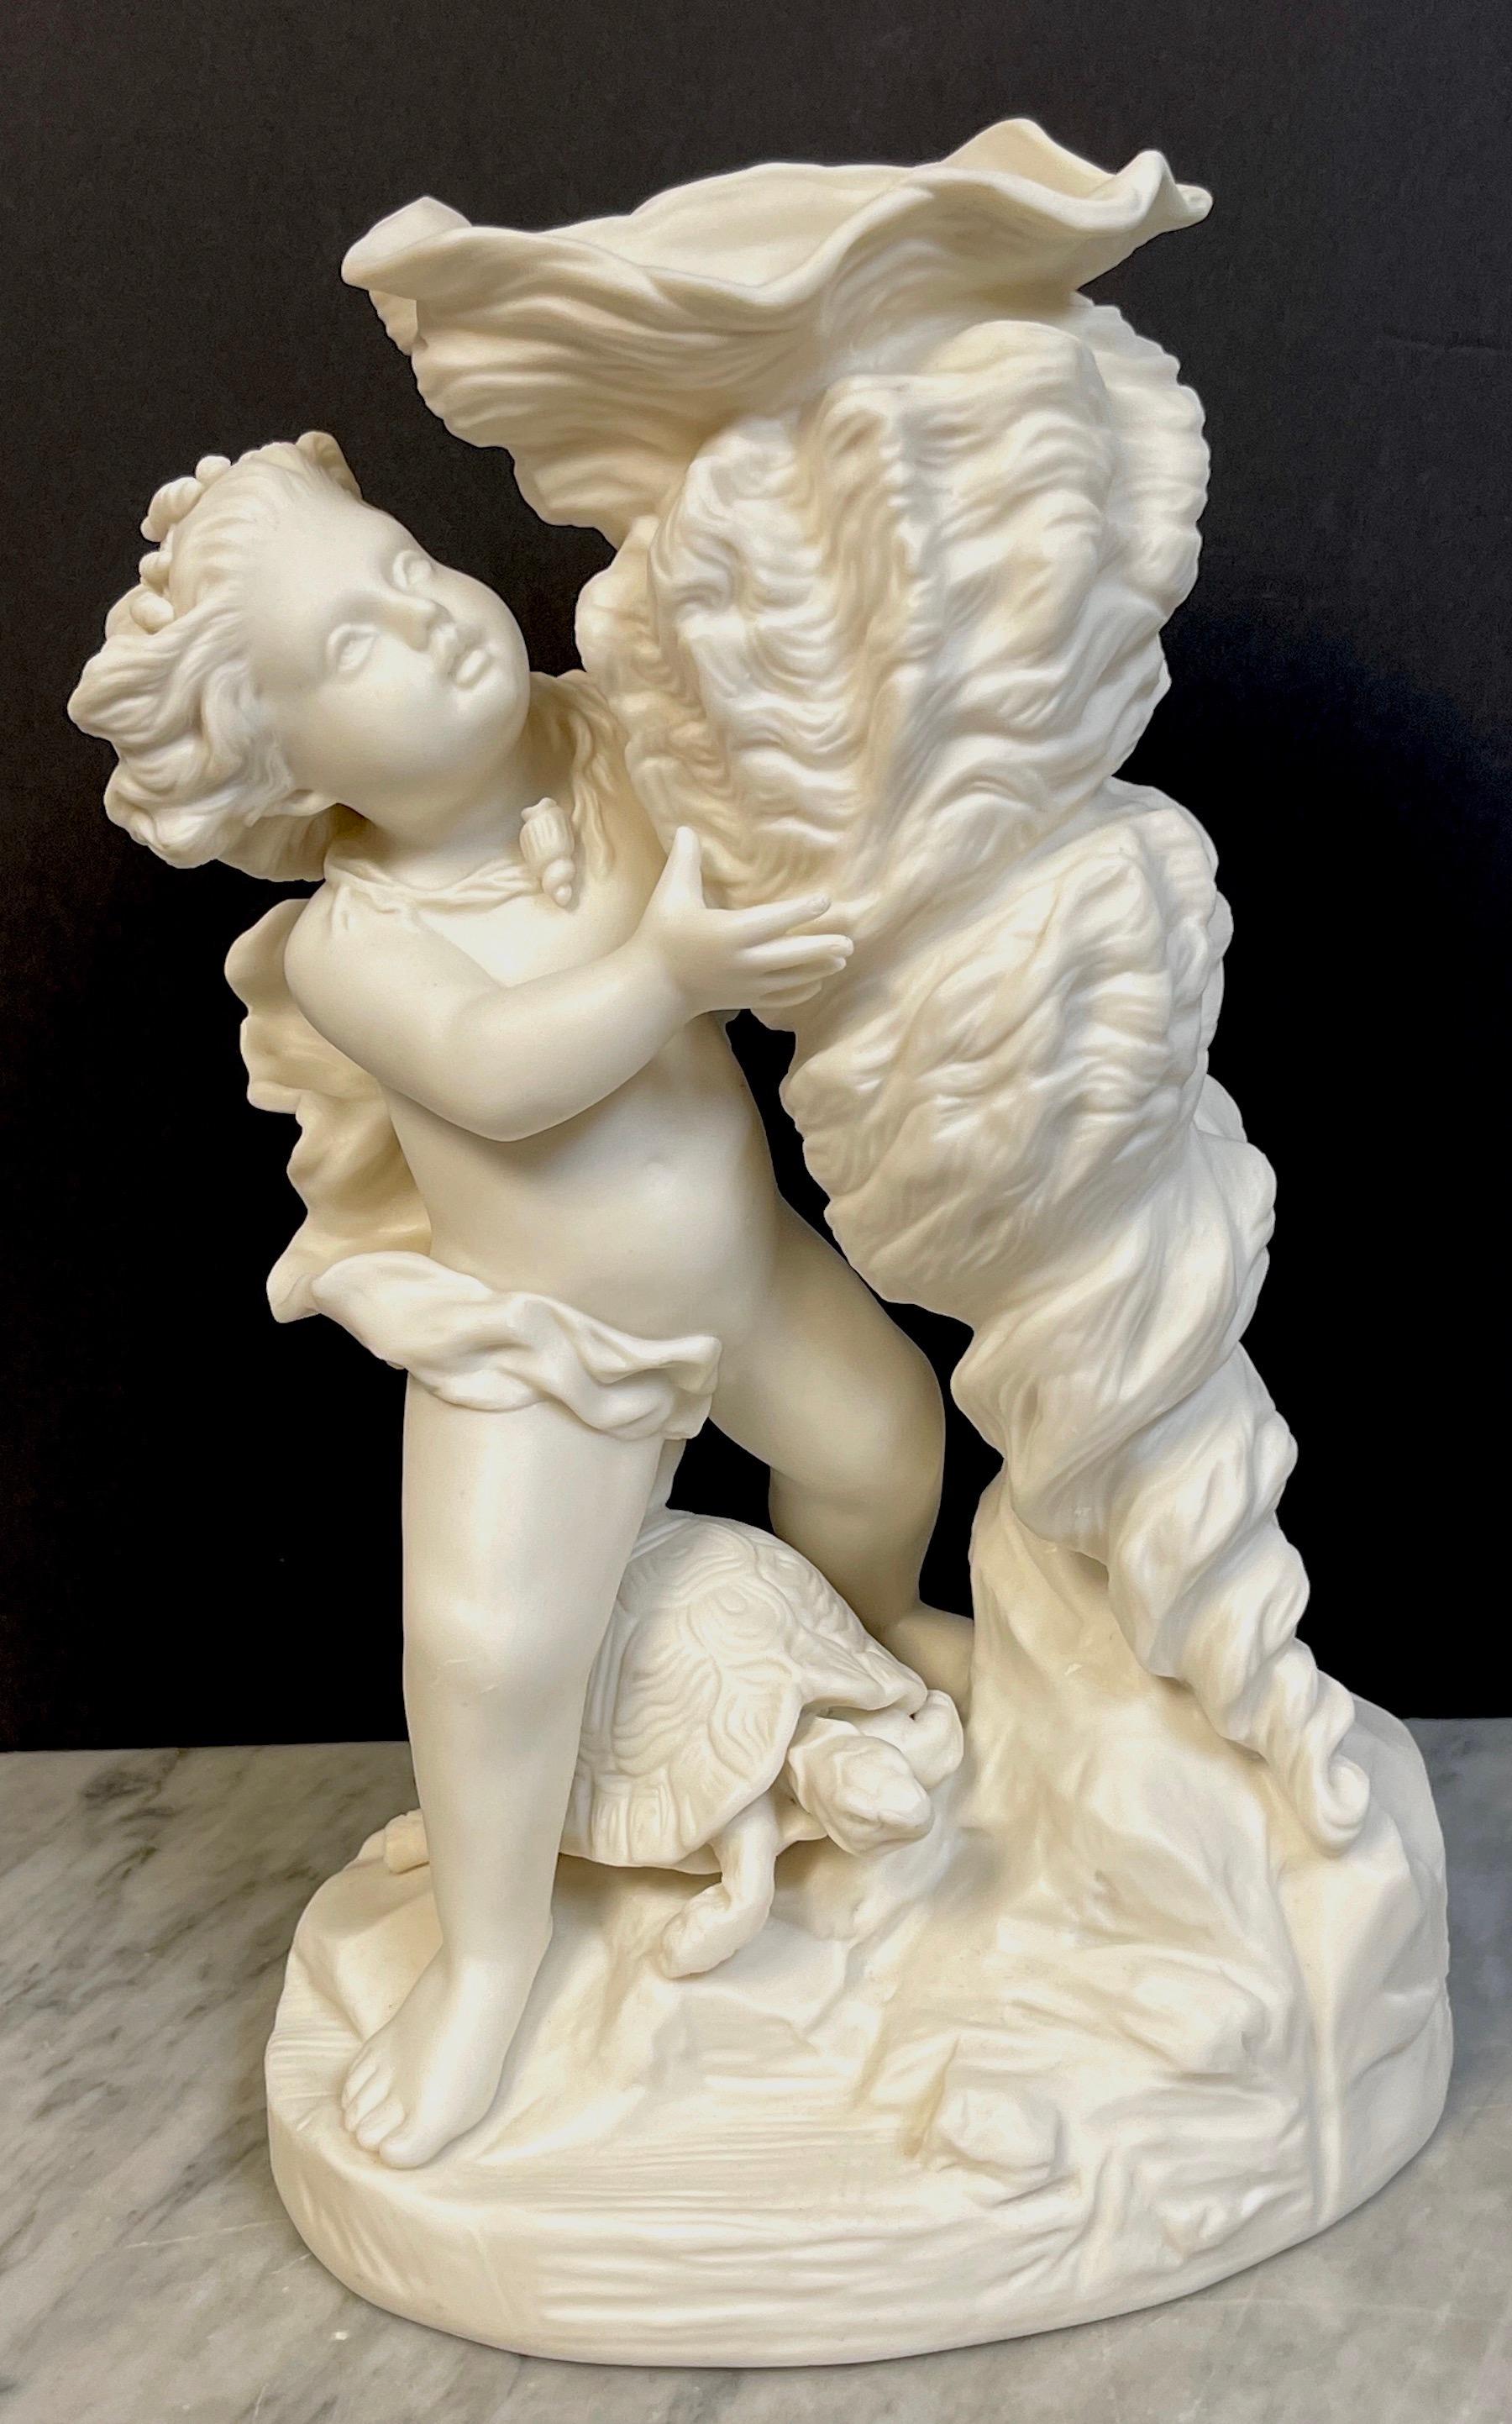 19th century Royal Copenhagen* Parian Aesthetic Movement Vase by Anna Plenge, 1870
*Attributed to Royal Copenhagen, this work is not marked Royal Copenhagen, it is signed by the artist/sculptor 
Anna Plenge, and is dated 1870.
Anna Plenge